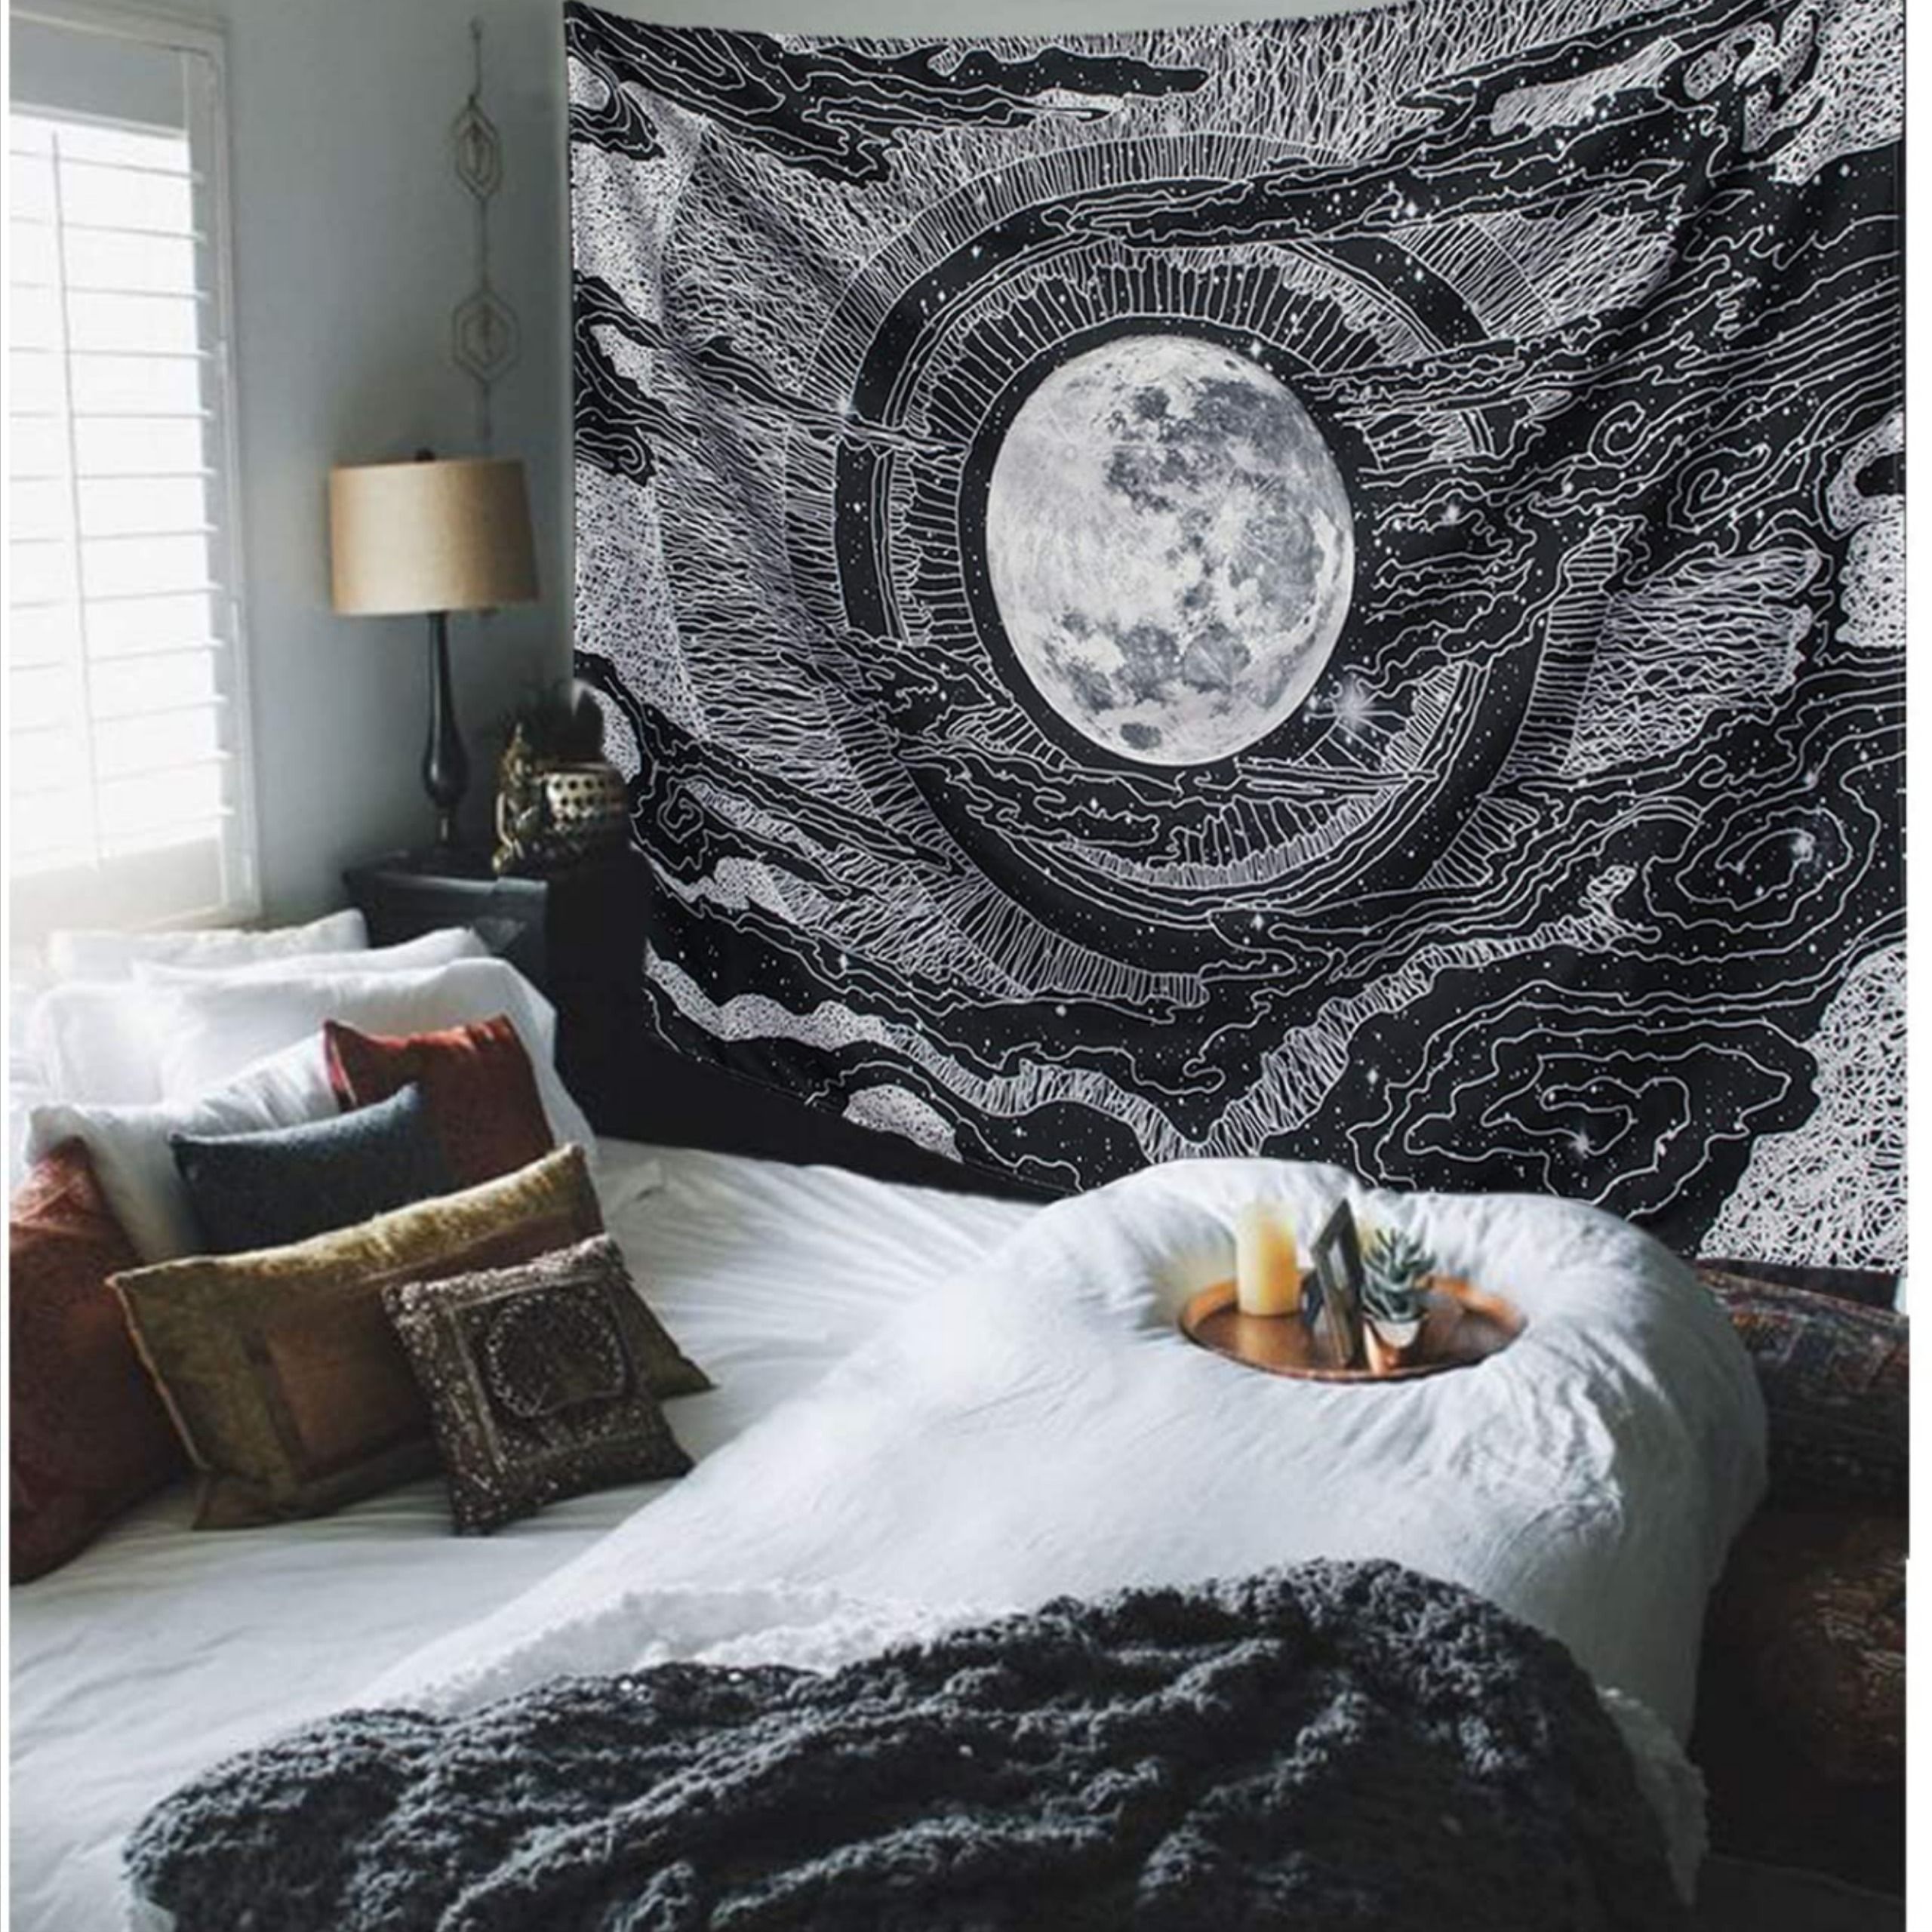 Moon Tapestry - Black and White - Dark Aesthetic - Bedroom Wall Decor